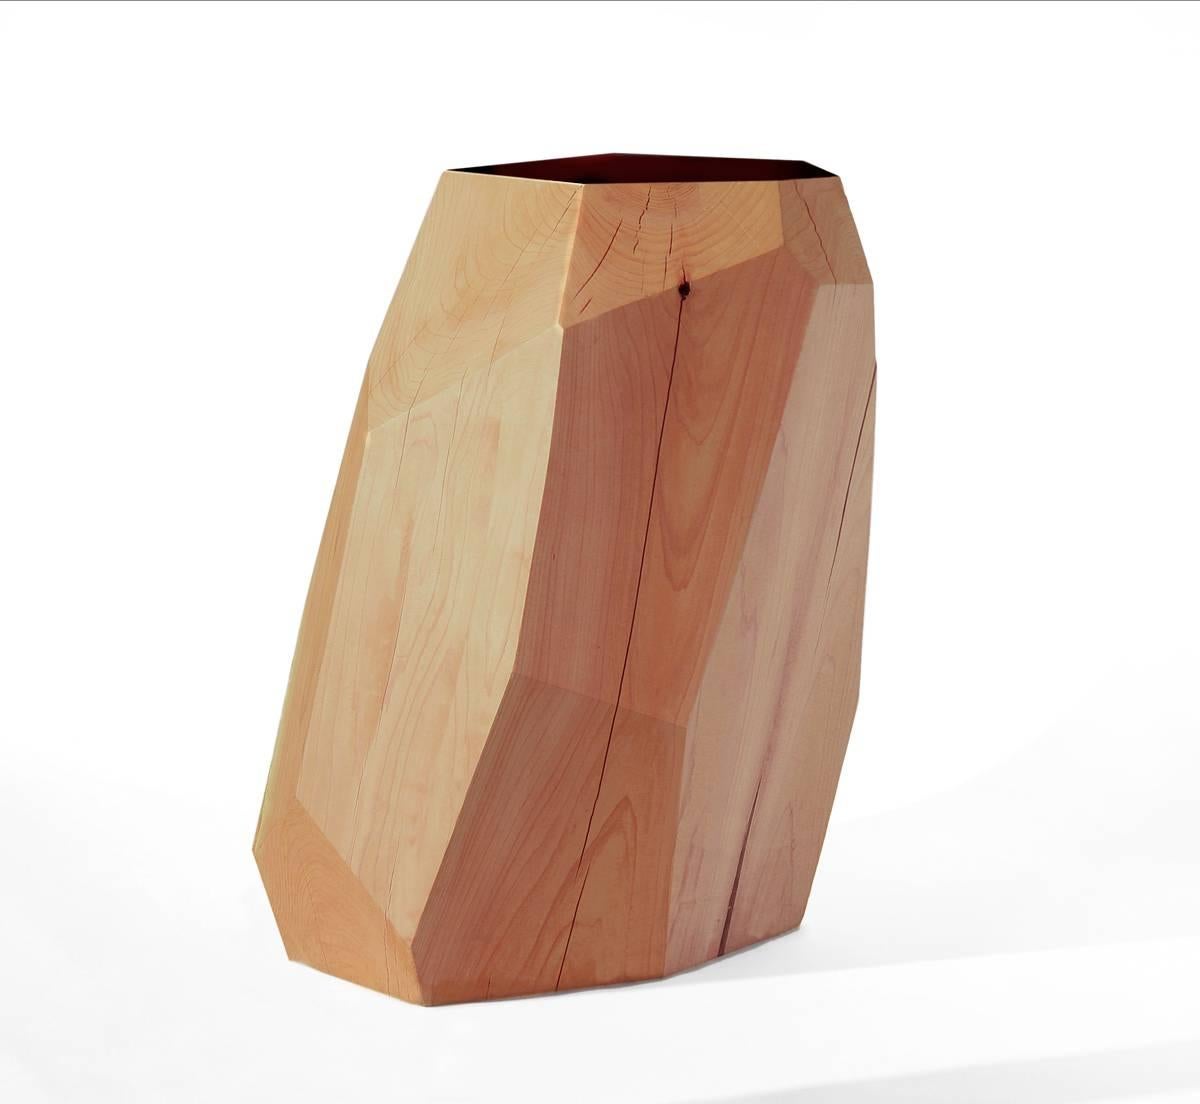 Stool / Table in Carbon Dyed Cedar with Carrara Marble Top by Hinterland Design In New Condition For Sale In Vancouver, BC